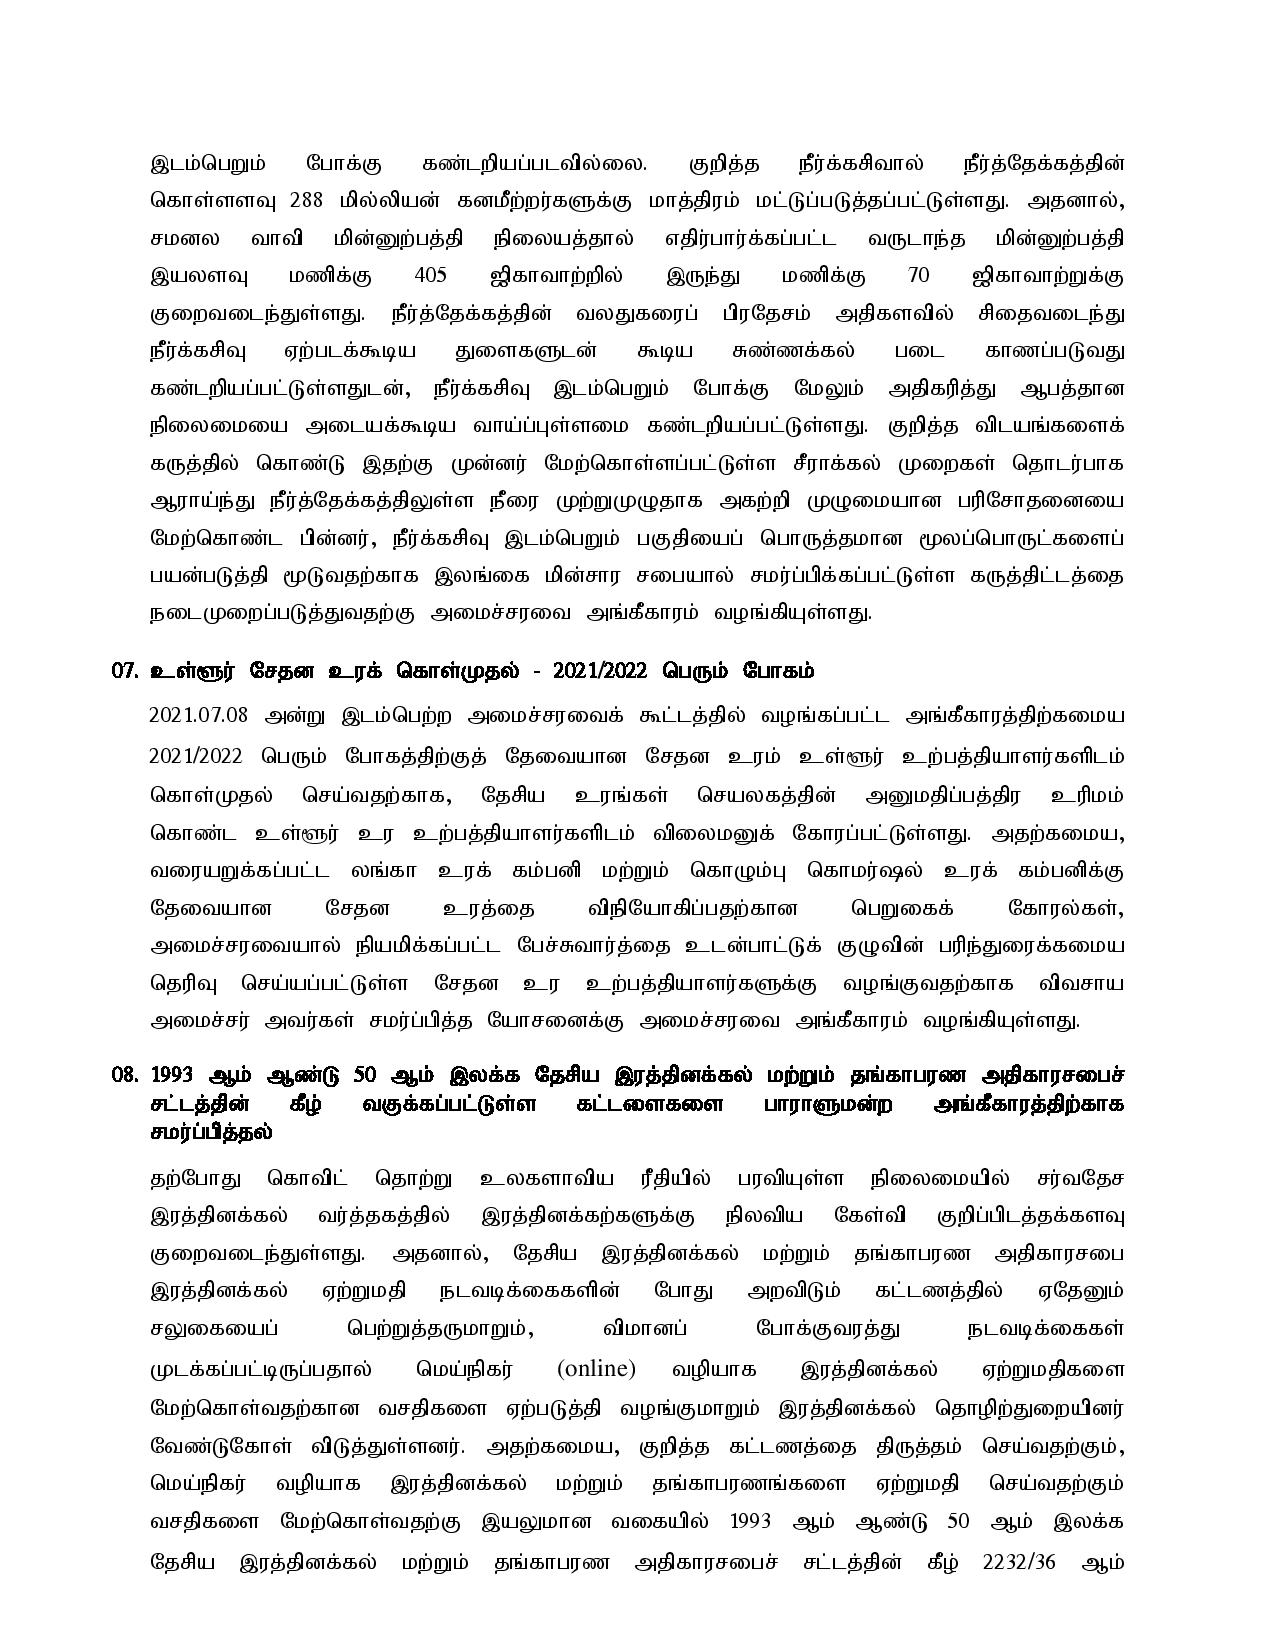 Canbinet Decision on 23.08.2021 Tamil page 004